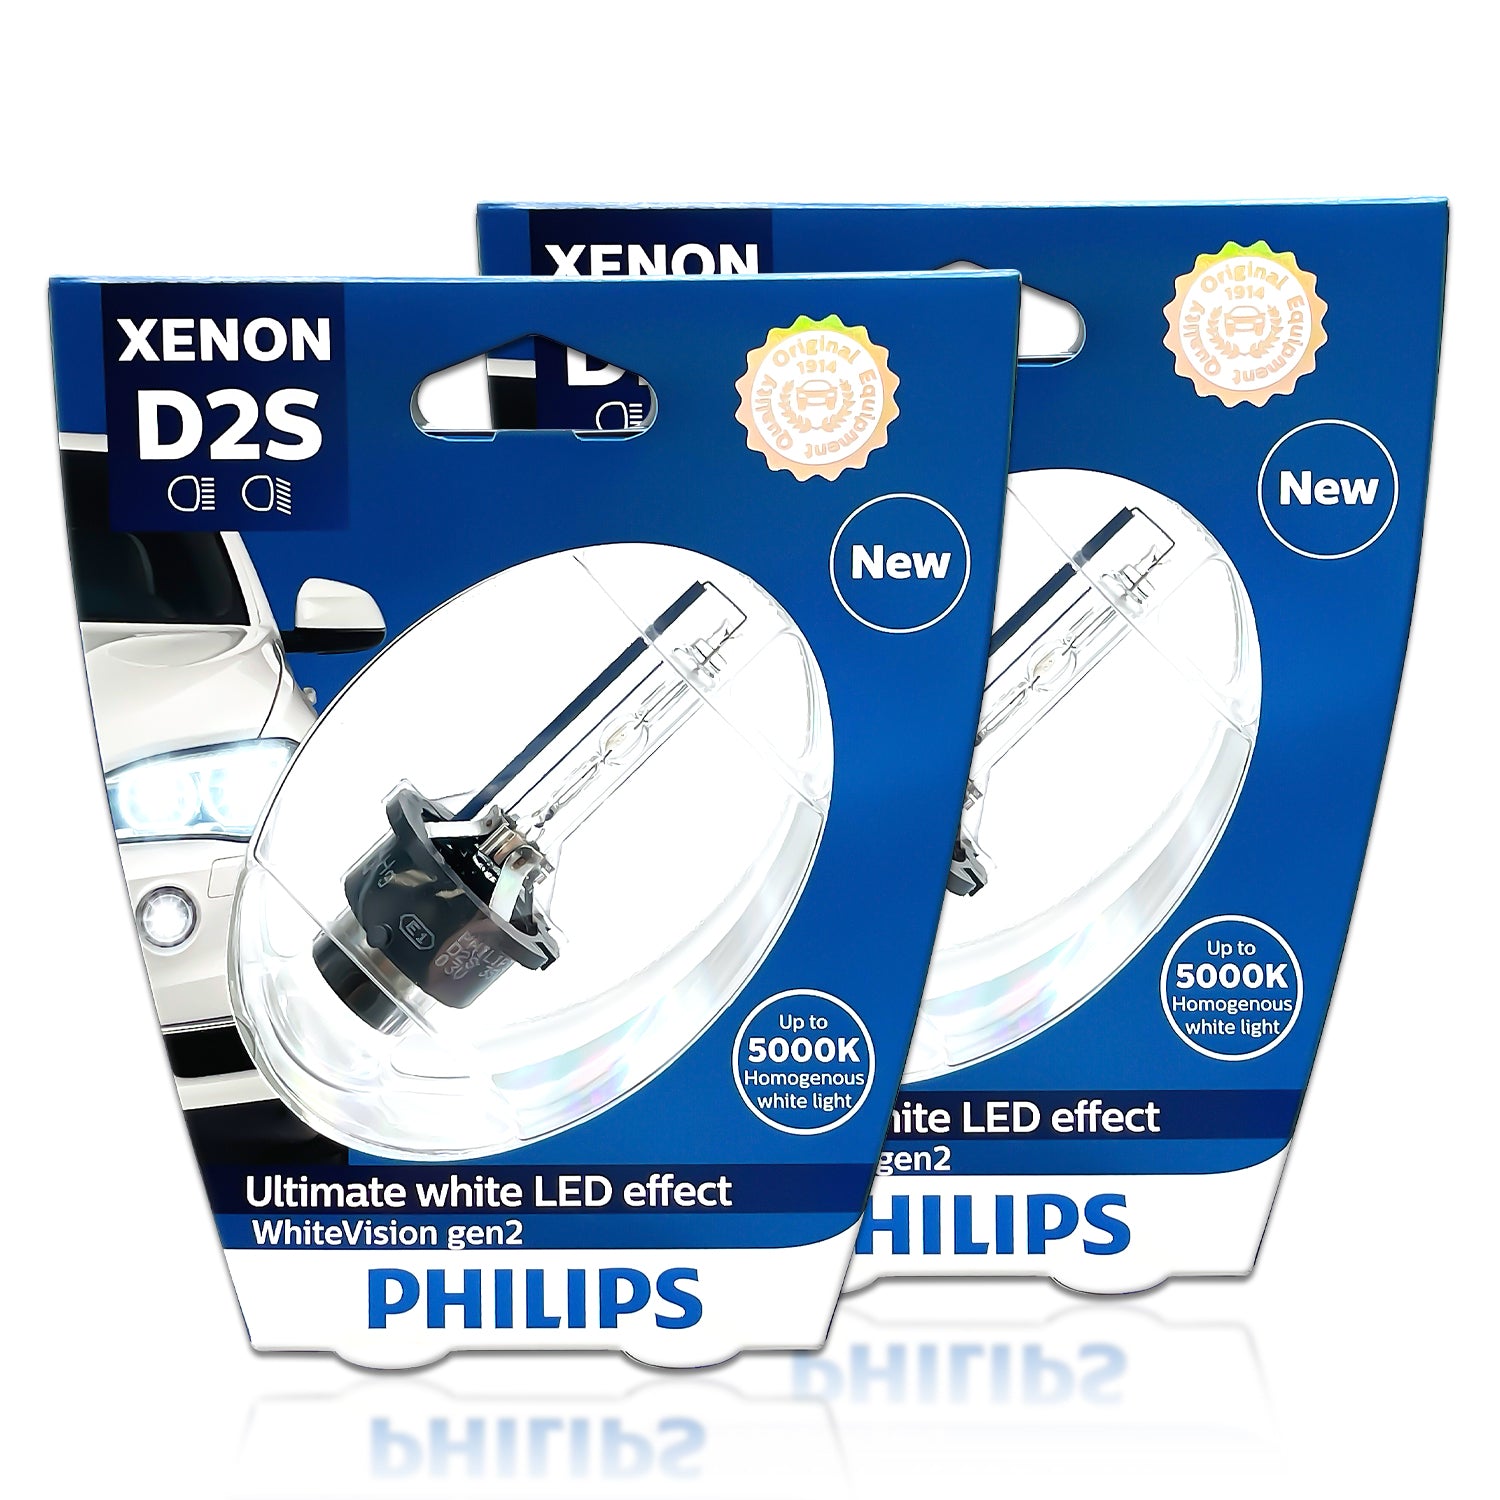 D2S: Philips 85122WHV2C1 WhiteVision Gen2 HID Xenon Bulbs – HID CONCEPT